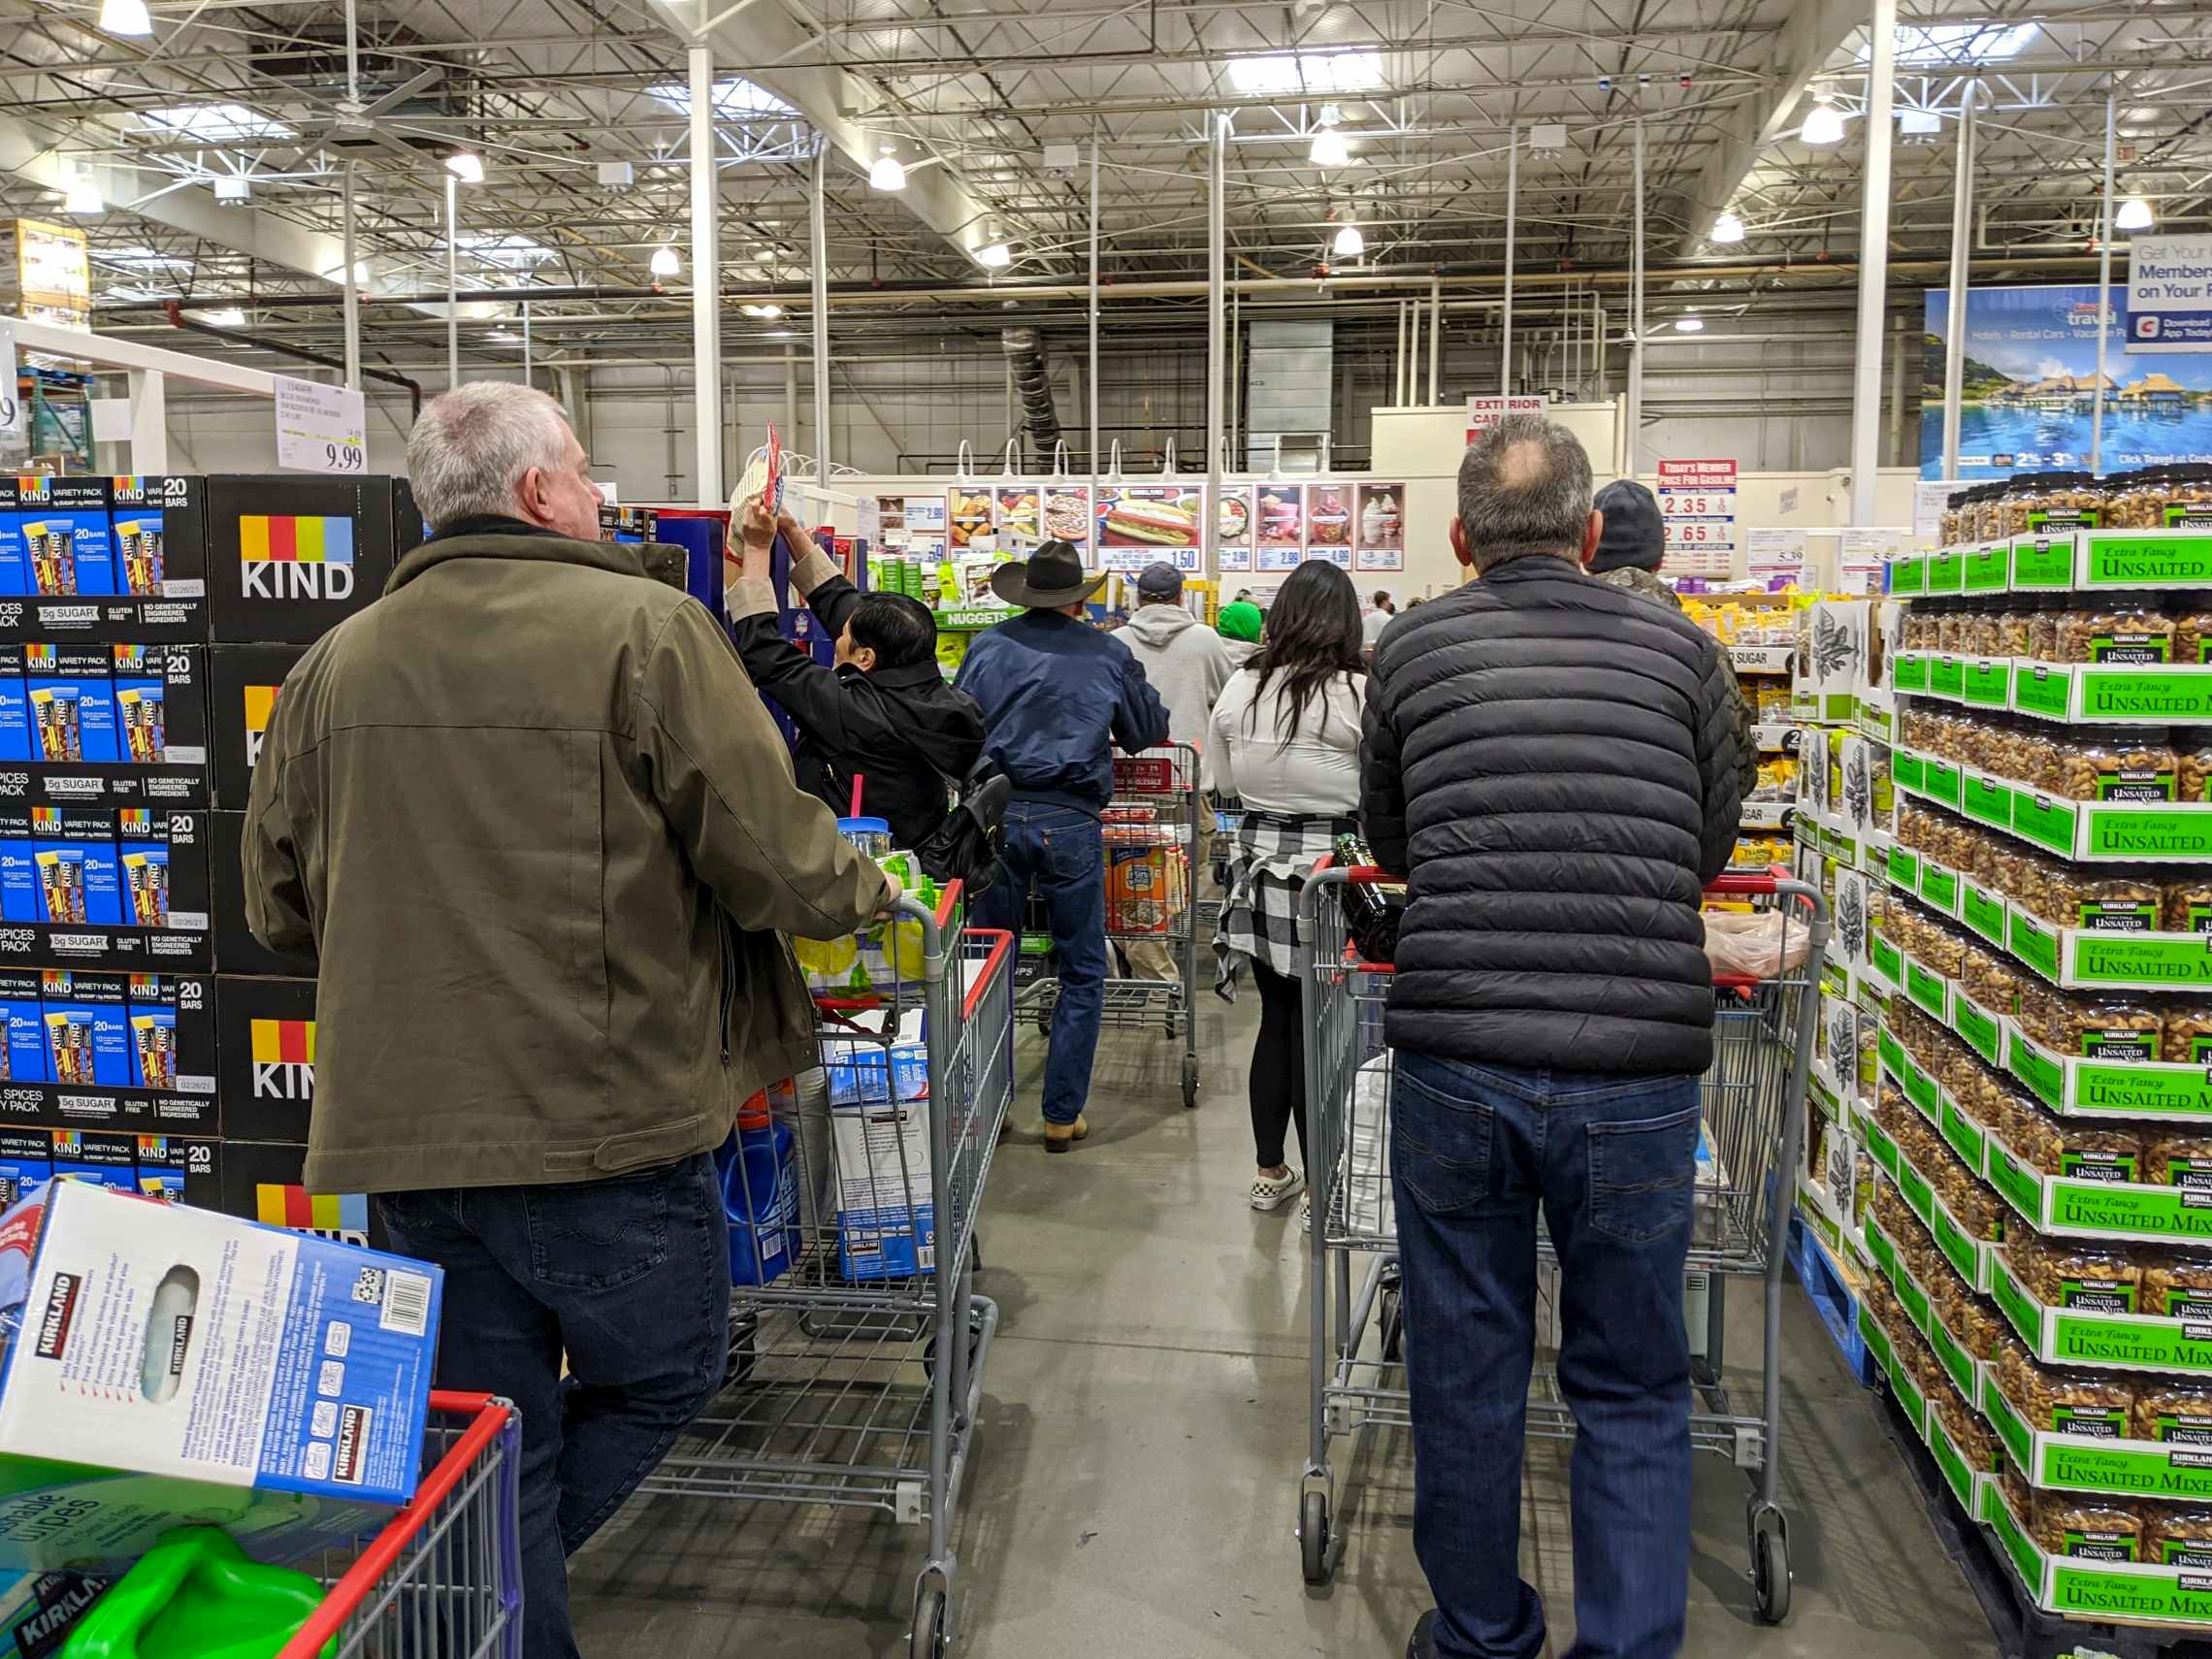 Customers with baskets full of food standing in a long line at Costco checkout.